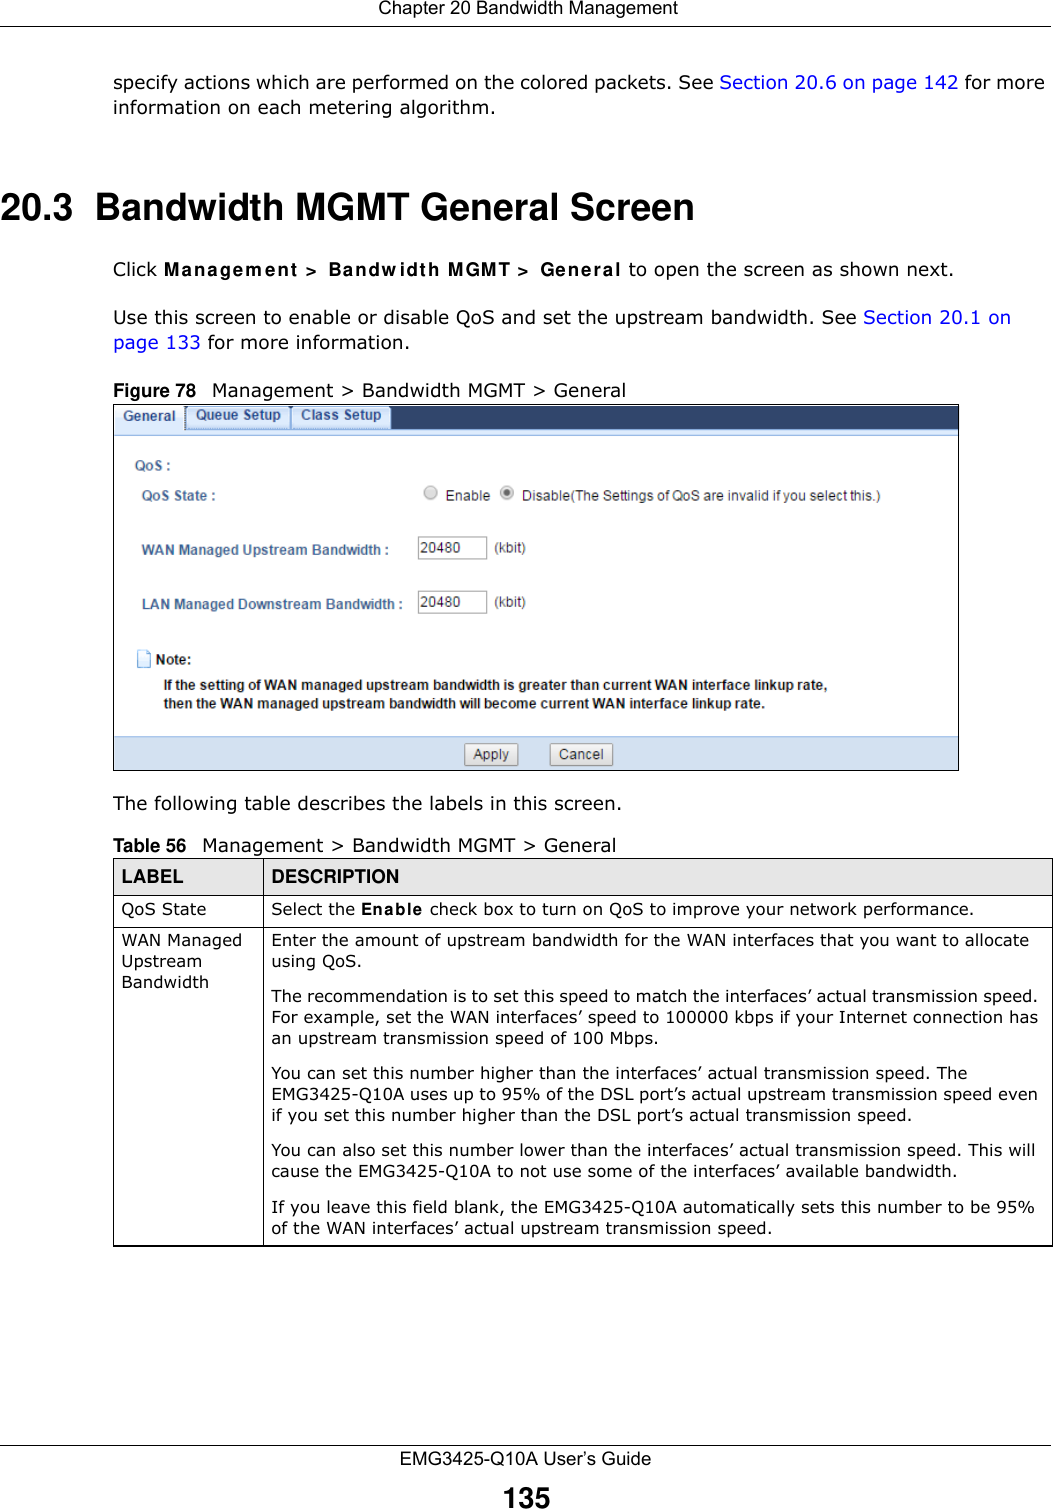  Chapter 20 Bandwidth ManagementEMG3425-Q10A User’s Guide135specify actions which are performed on the colored packets. See Section 20.6 on page 142 for more information on each metering algorithm.20.3  Bandwidth MGMT General Screen Click M a nagem e nt &gt;  Bandw idt h M GMT &gt;  General to open the screen as shown next. Use this screen to enable or disable QoS and set the upstream bandwidth. See Section 20.1 on page 133 for more information.Figure 78   Management &gt; Bandwidth MGMT &gt; GeneralThe following table describes the labels in this screen. Table 56   Management &gt; Bandwidth MGMT &gt; GeneralLABEL DESCRIPTIONQoS State Select the En able check box to turn on QoS to improve your network performance. WAN Managed Upstream Bandwidth Enter the amount of upstream bandwidth for the WAN interfaces that you want to allocate using QoS. The recommendation is to set this speed to match the interfaces’ actual transmission speed. For example, set the WAN interfaces’ speed to 100000 kbps if your Internet connection has an upstream transmission speed of 100 Mbps.        You can set this number higher than the interfaces’ actual transmission speed. The EMG3425-Q10A uses up to 95% of the DSL port’s actual upstream transmission speed even if you set this number higher than the DSL port’s actual transmission speed.You can also set this number lower than the interfaces’ actual transmission speed. This will cause the EMG3425-Q10A to not use some of the interfaces’ available bandwidth.If you leave this field blank, the EMG3425-Q10A automatically sets this number to be 95% of the WAN interfaces’ actual upstream transmission speed.